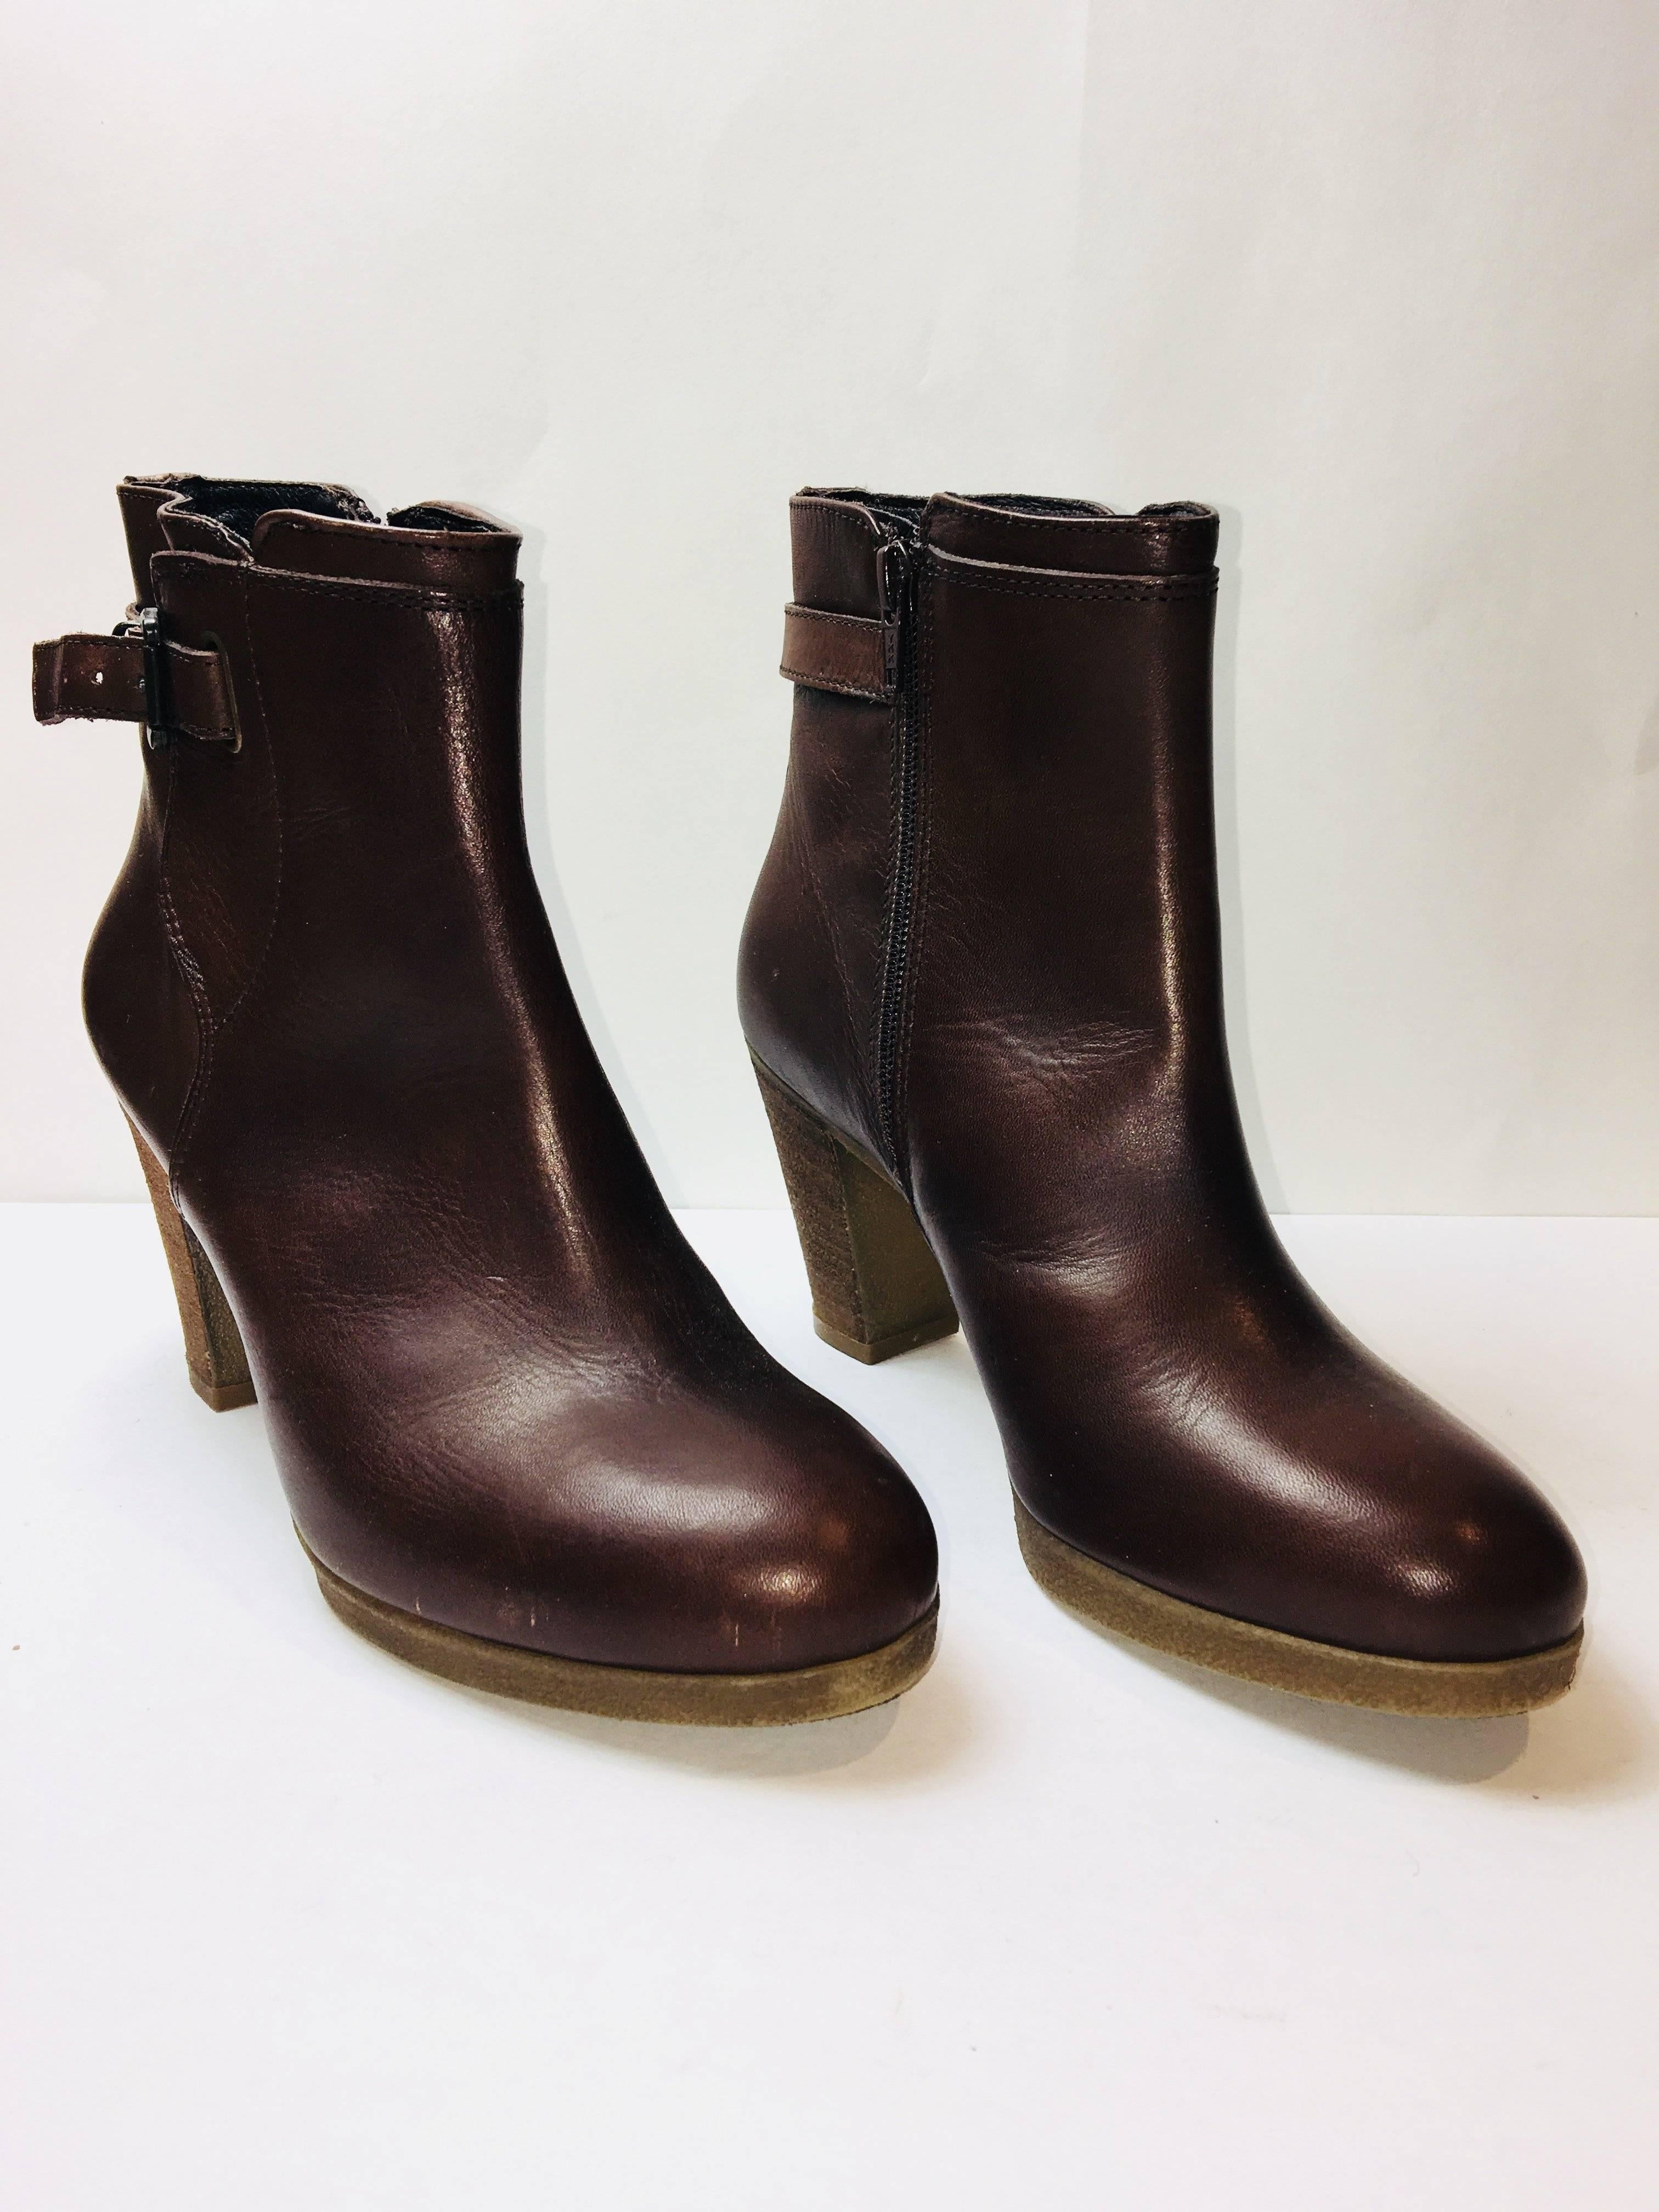 Barneys New York Brown Leather Booties with Ankle Buckle and Side Zips.